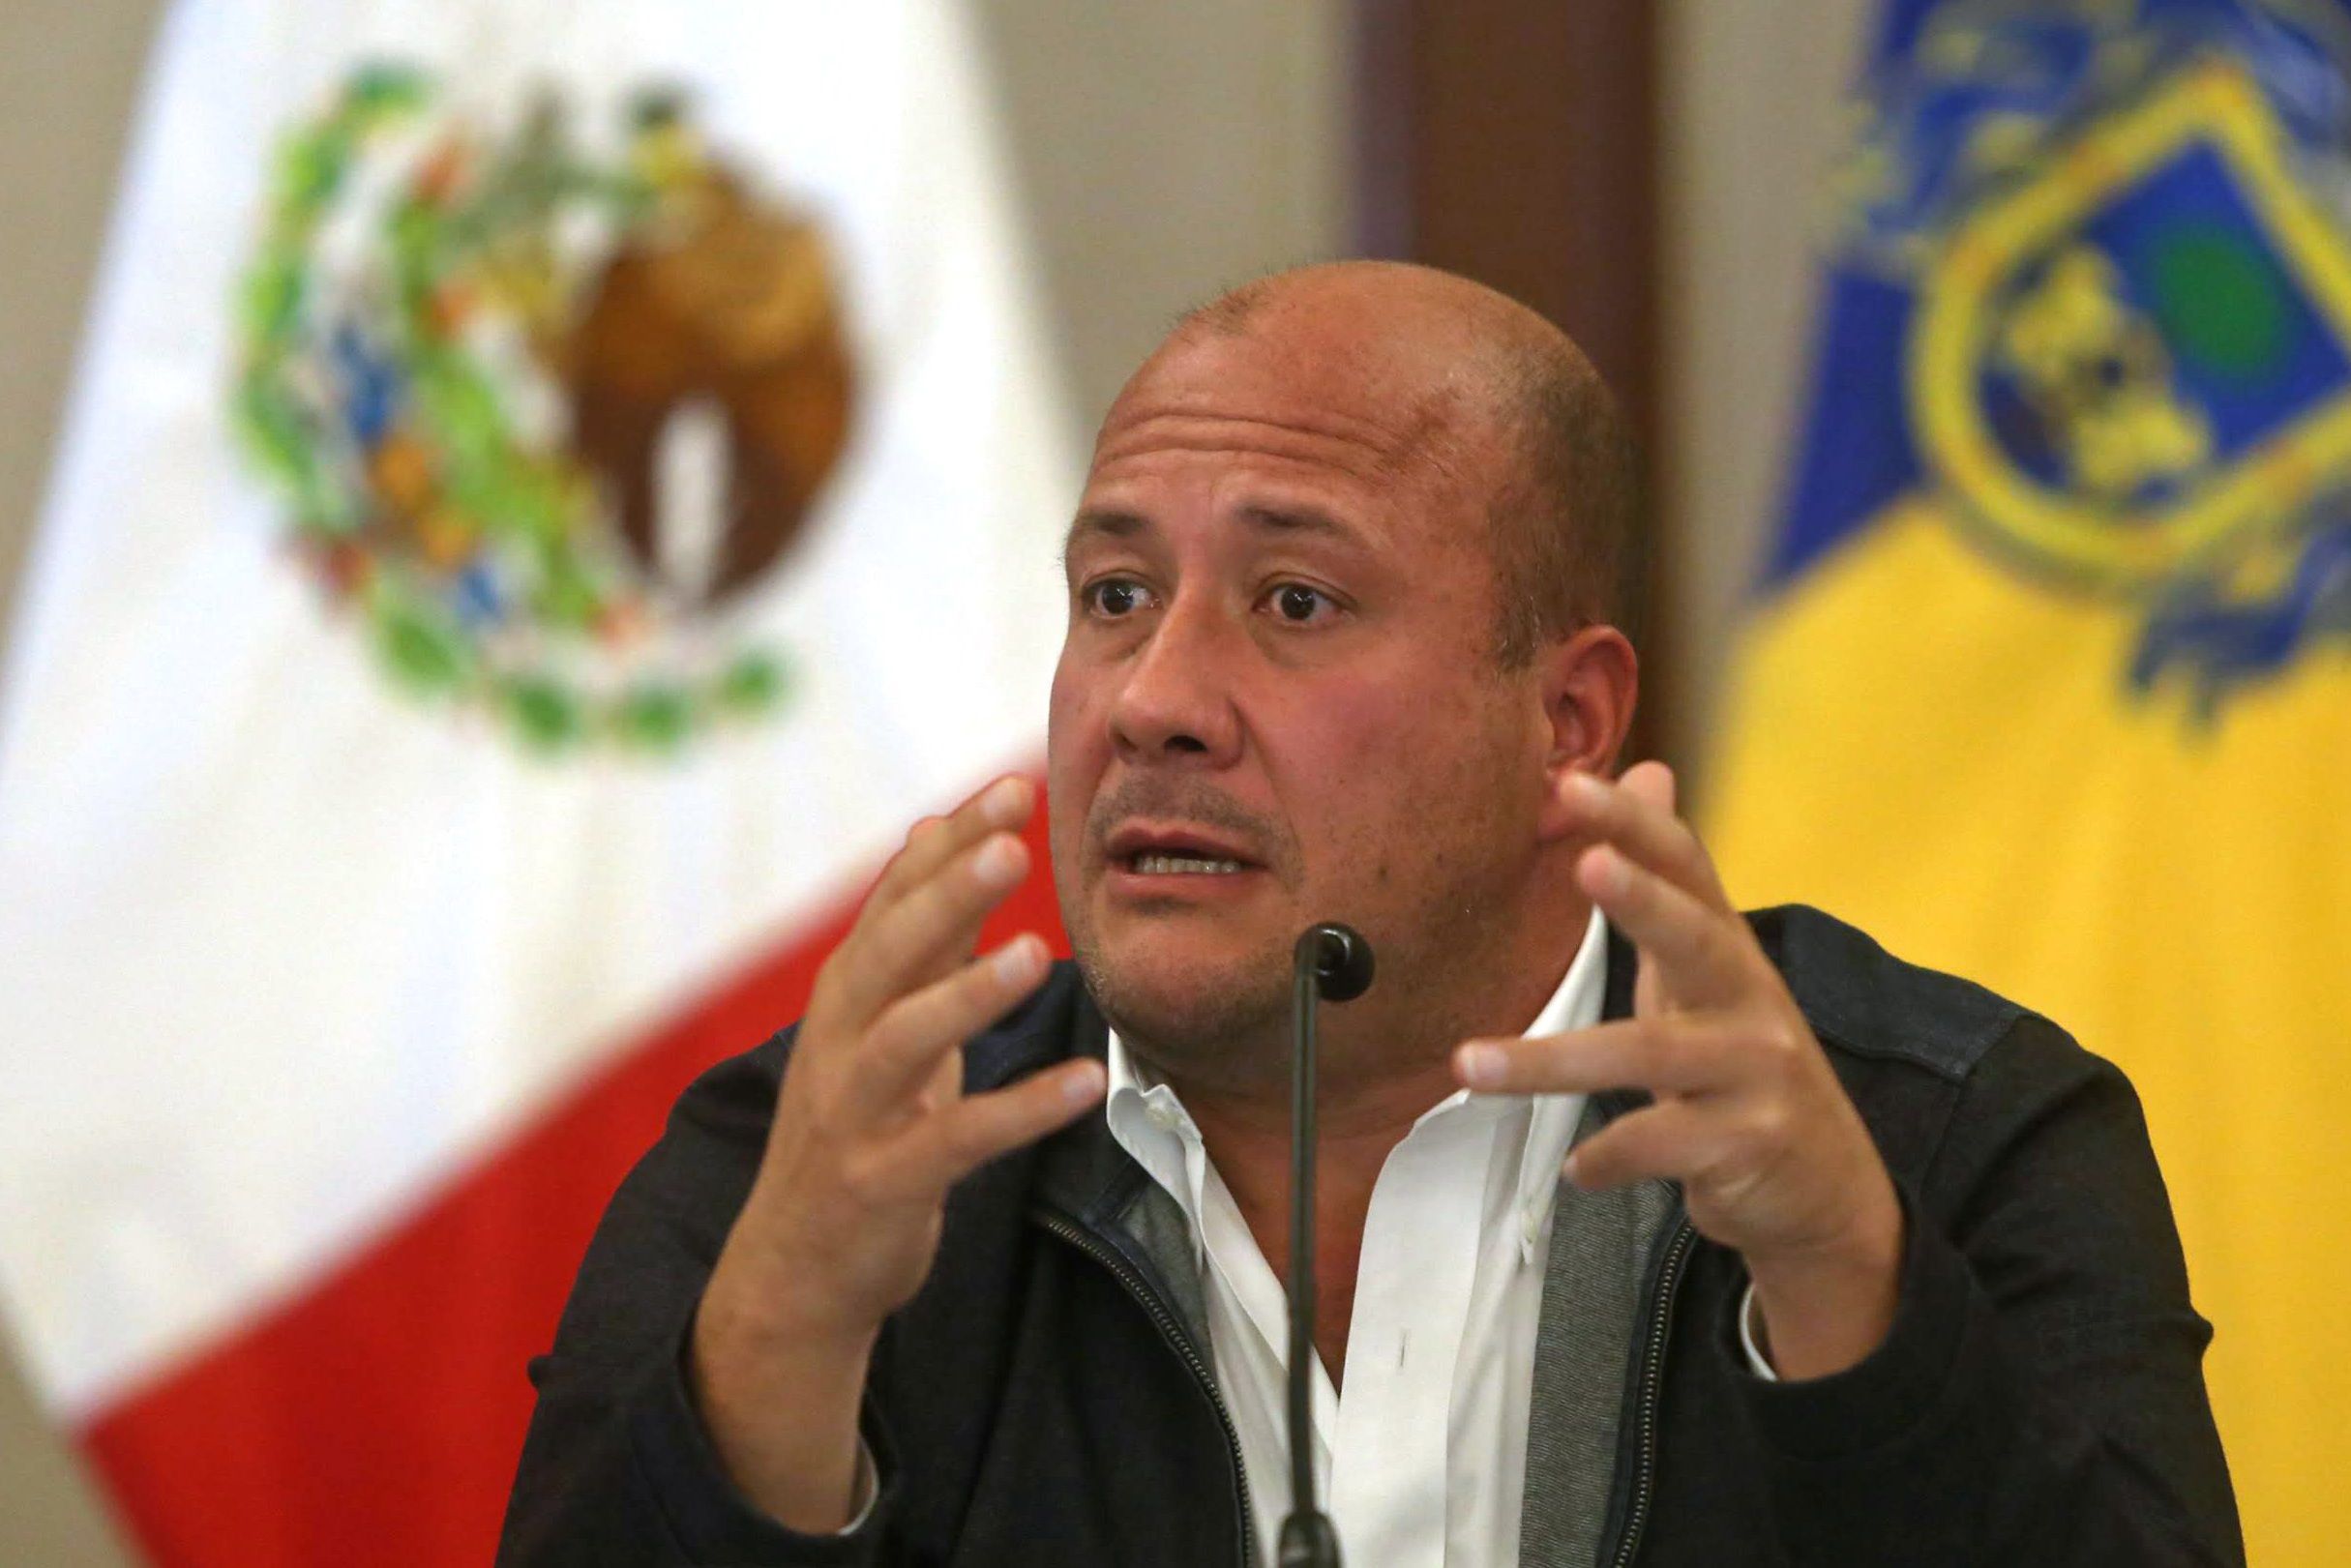 Enrique Alfaro made his position clear on the new textbooks in Jalisco (EFE/Francisco Guasco)